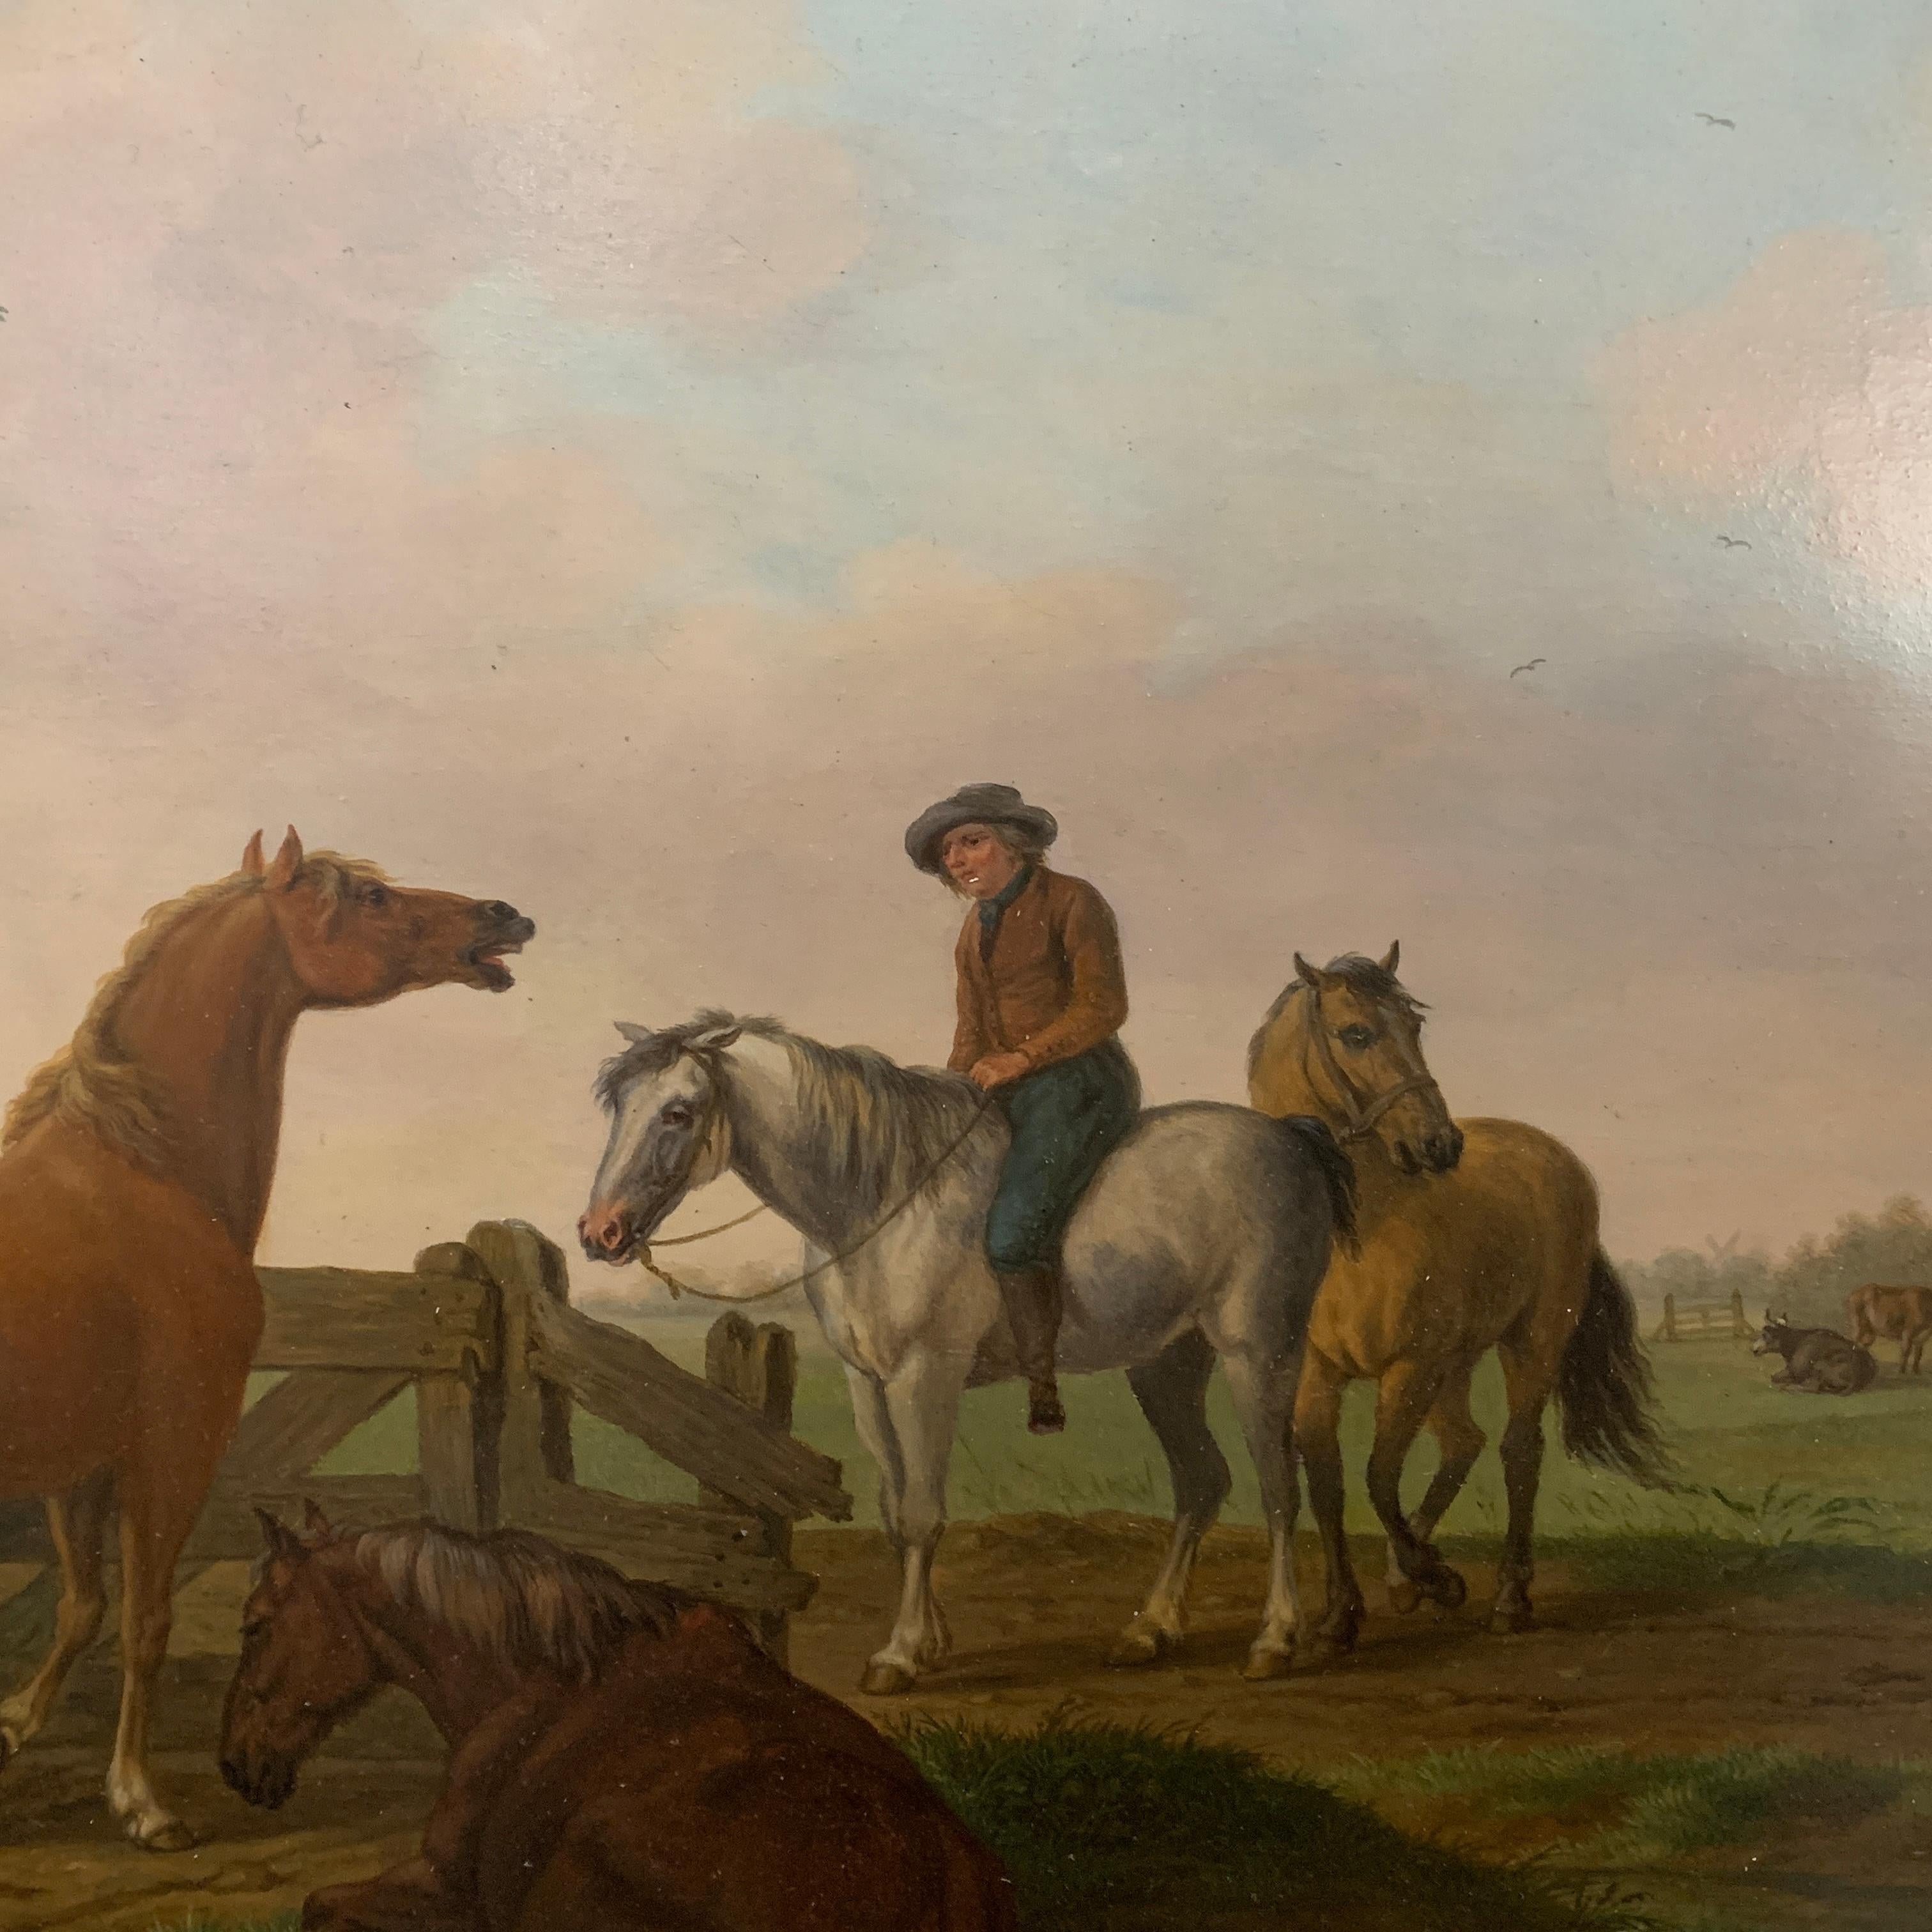 18th century Dutch oil of men on horses with landscape, and dog by a pond - Old Masters Painting by Tethart Philip Christiaan Haag